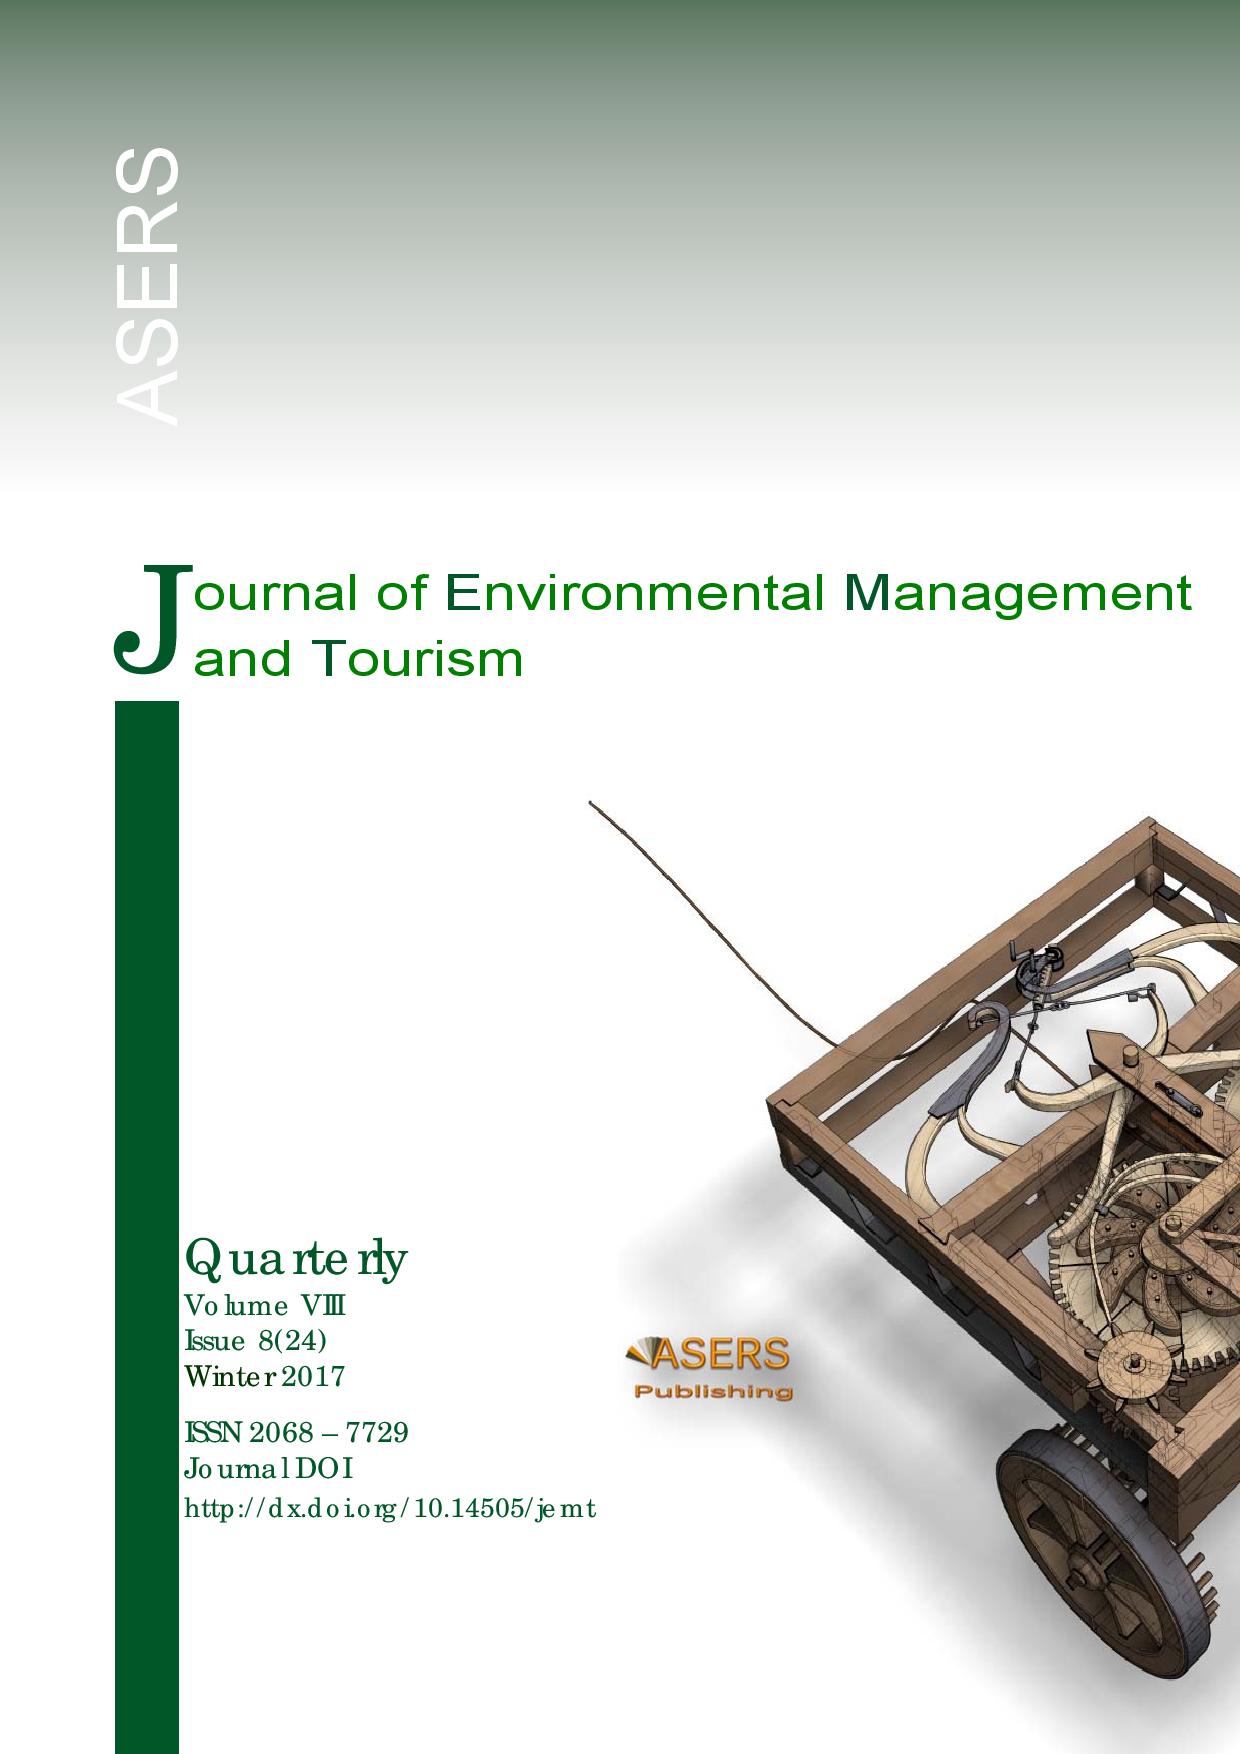 Hotel Ethical Behavior and Tourist Origin as Determinants of Satisfaction